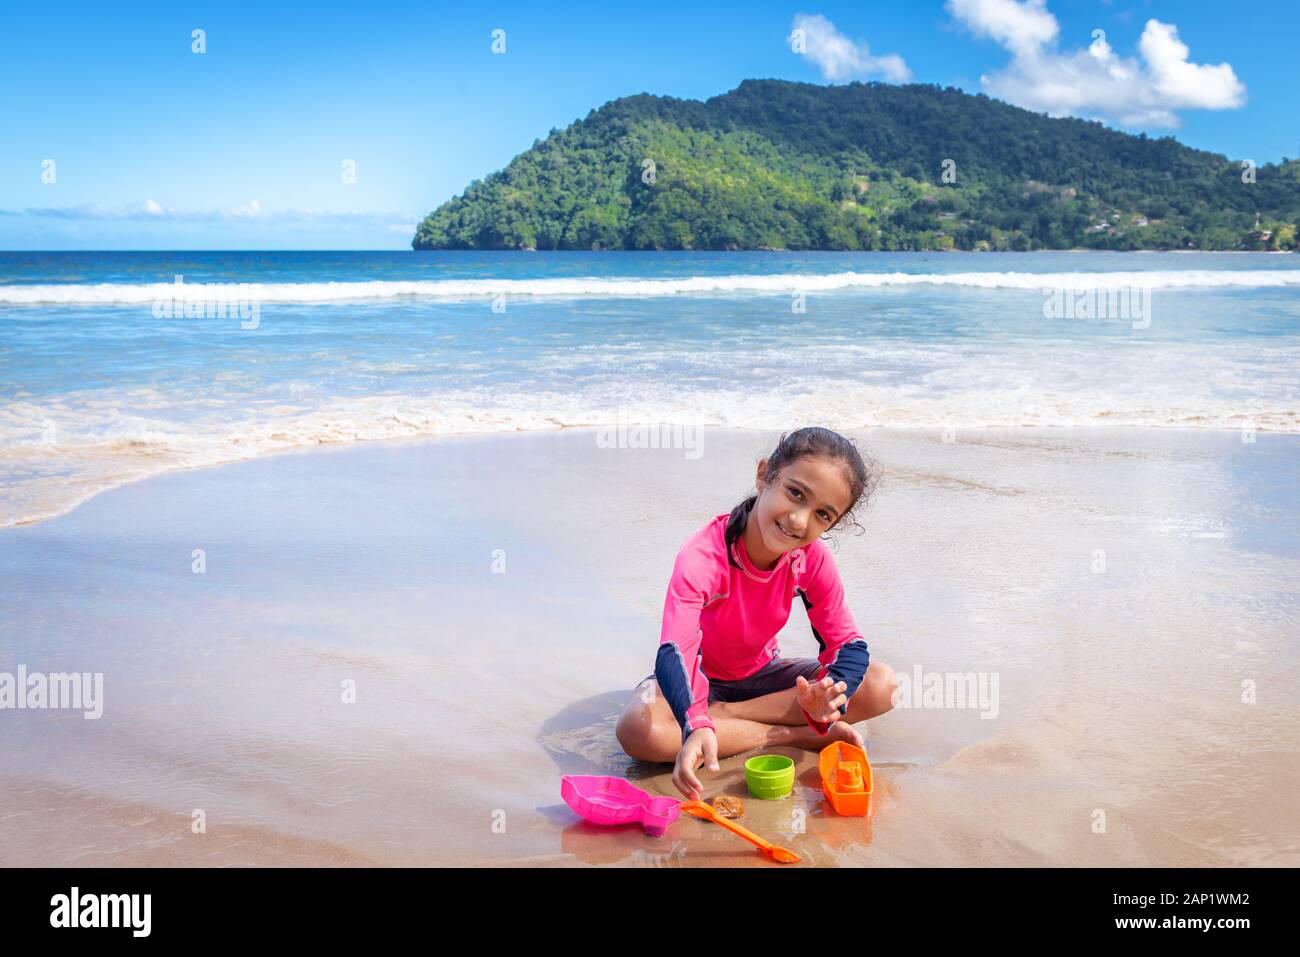 Little girl playing with sand on Maracas Bay Beach Trinidad and Tobago sitting outdoors fun activity smiling Stock Photo